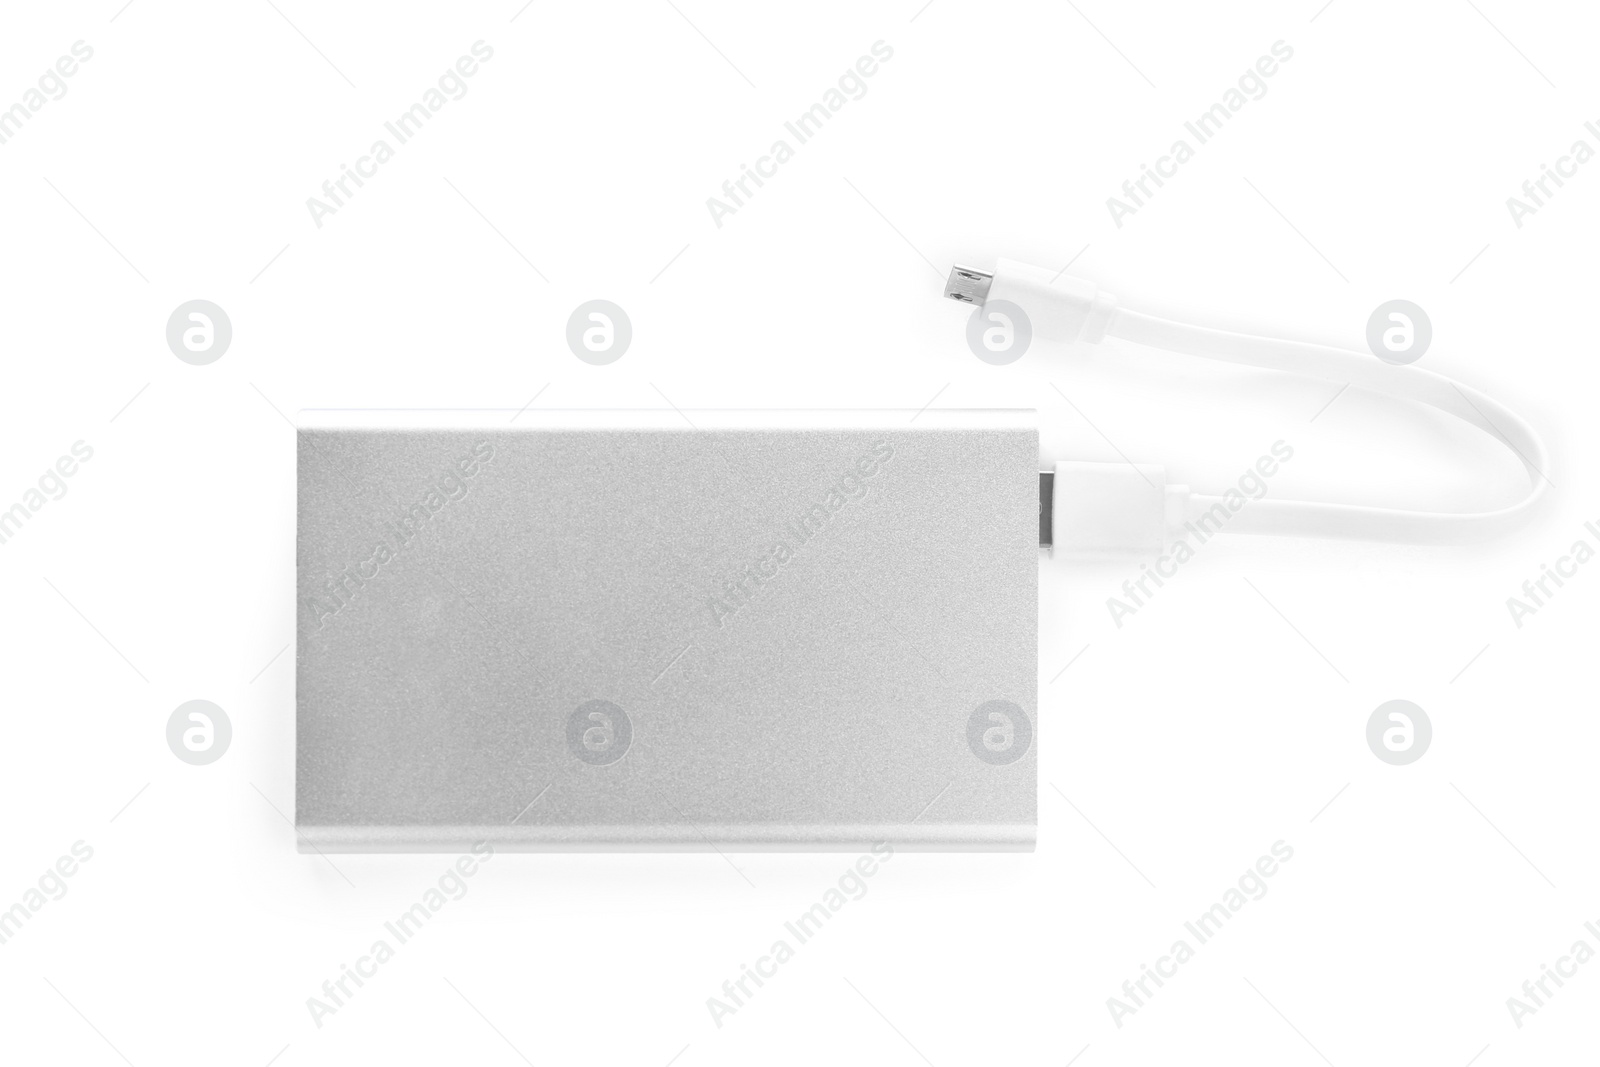 Photo of Modern external portable charger with cable isolated on white, top view